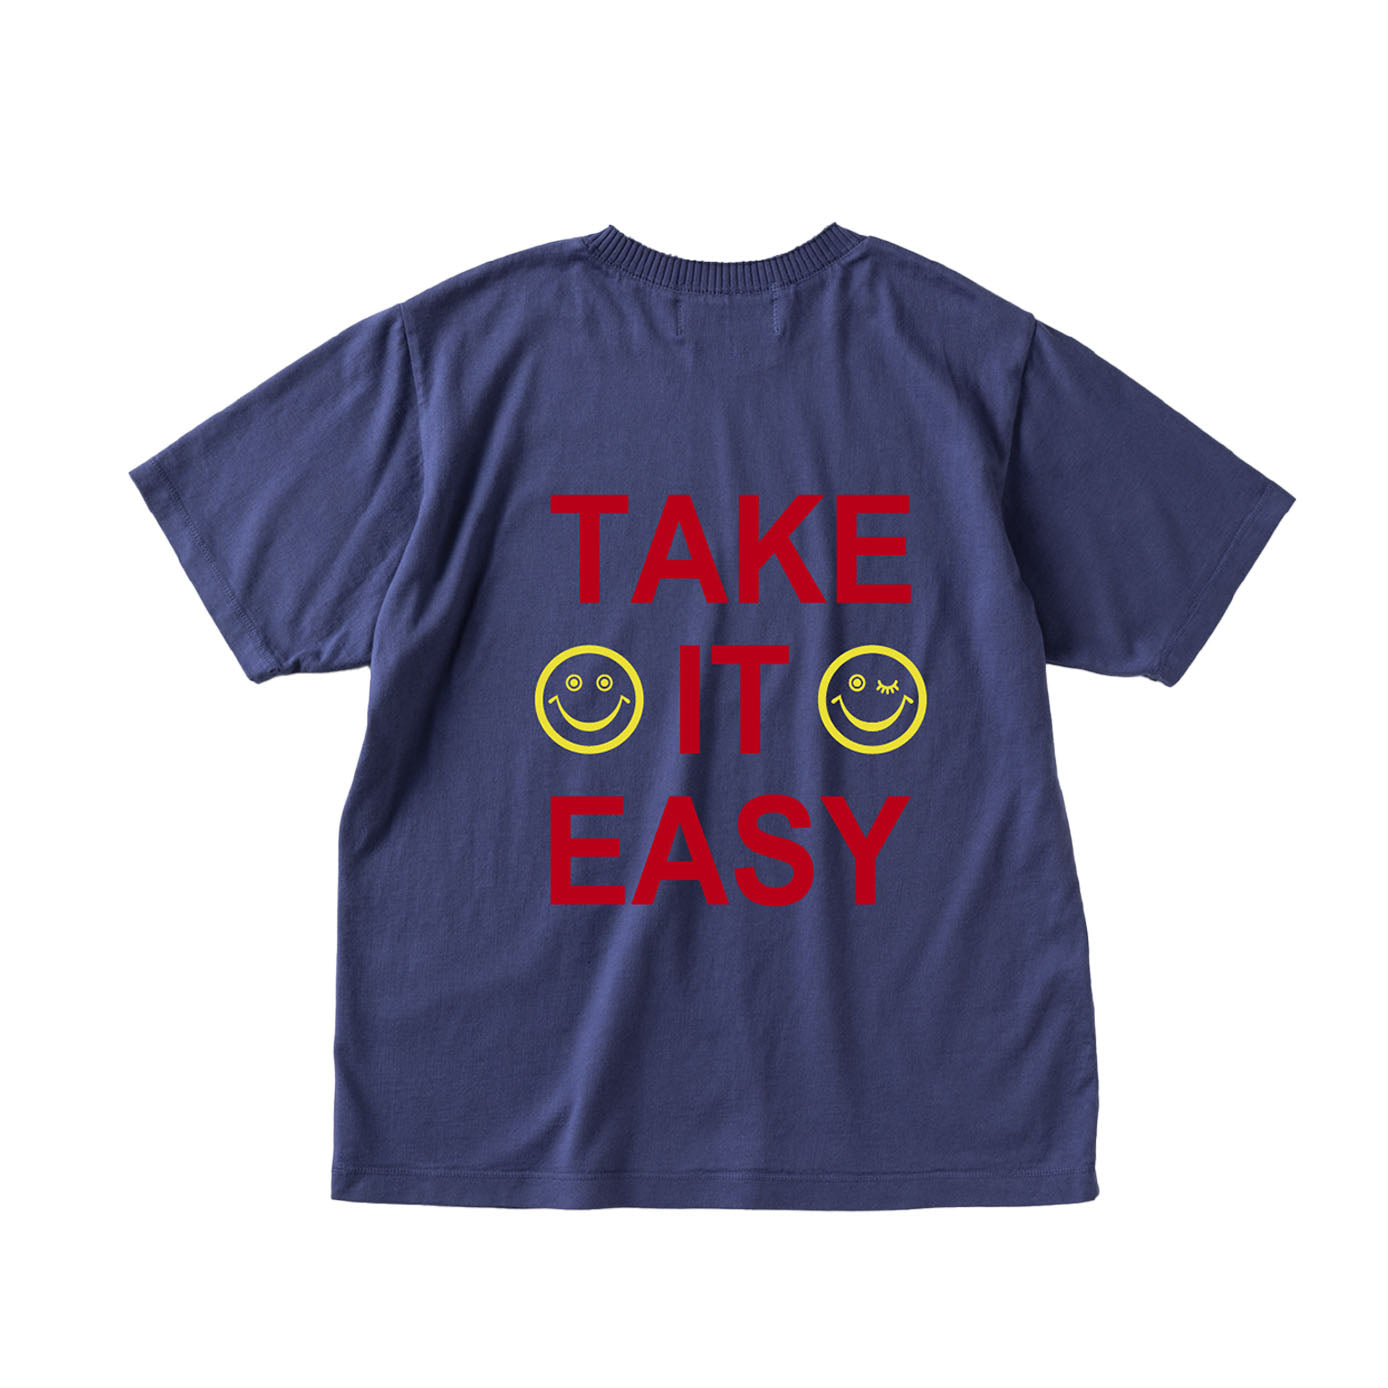 【Perfect ribs®︎×A LOVE MOVEMENT】"SMILE & TAKE IT EASY"Short Sleeve T Shirts / Vintage Navy (ベーシック ショートスリーブ ティーシャツ/ヴィンテージネイビー)